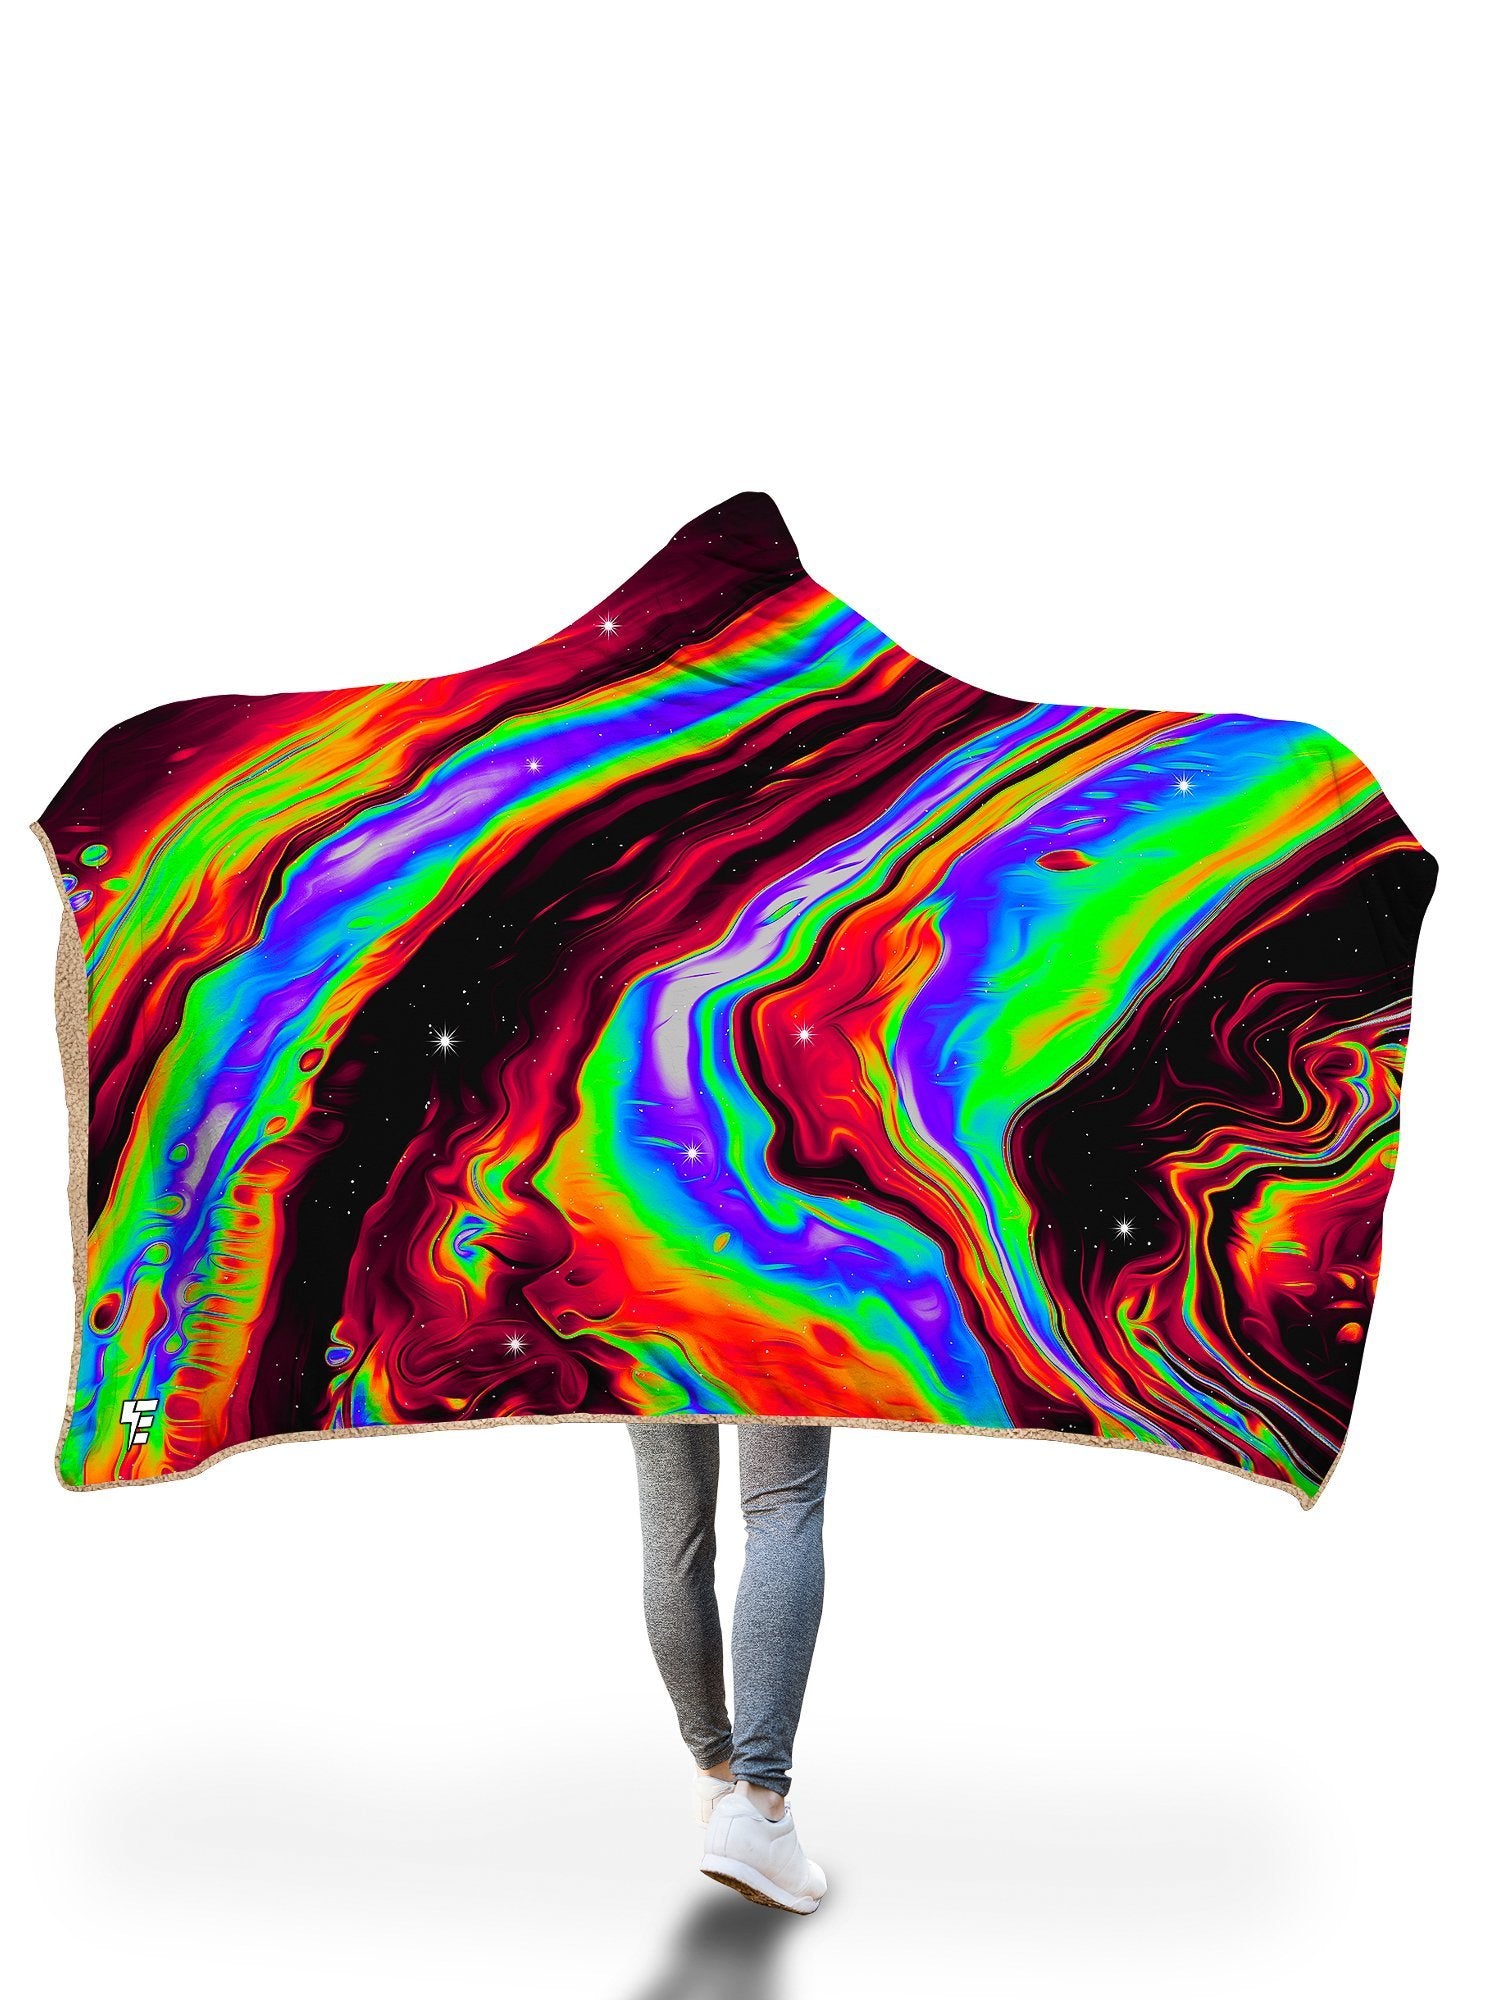 Neon Venus Fly Trap Hooded Blanket Electro Threads 